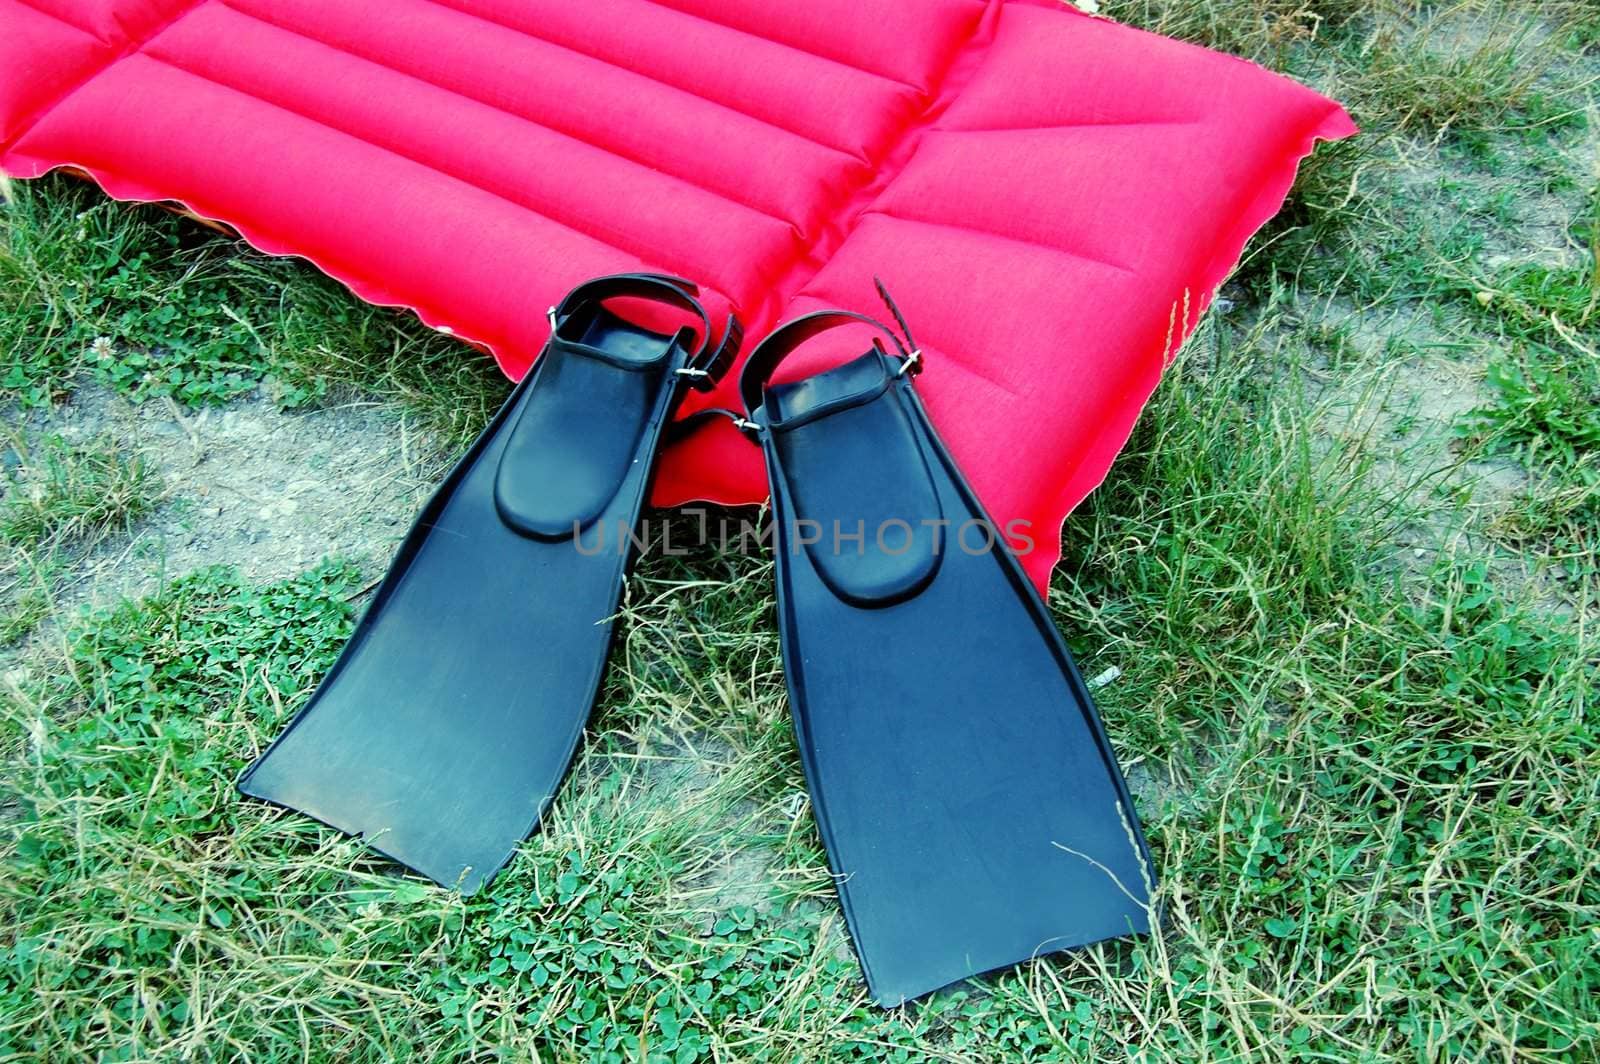 pair of black swimfins and red mattrass on green